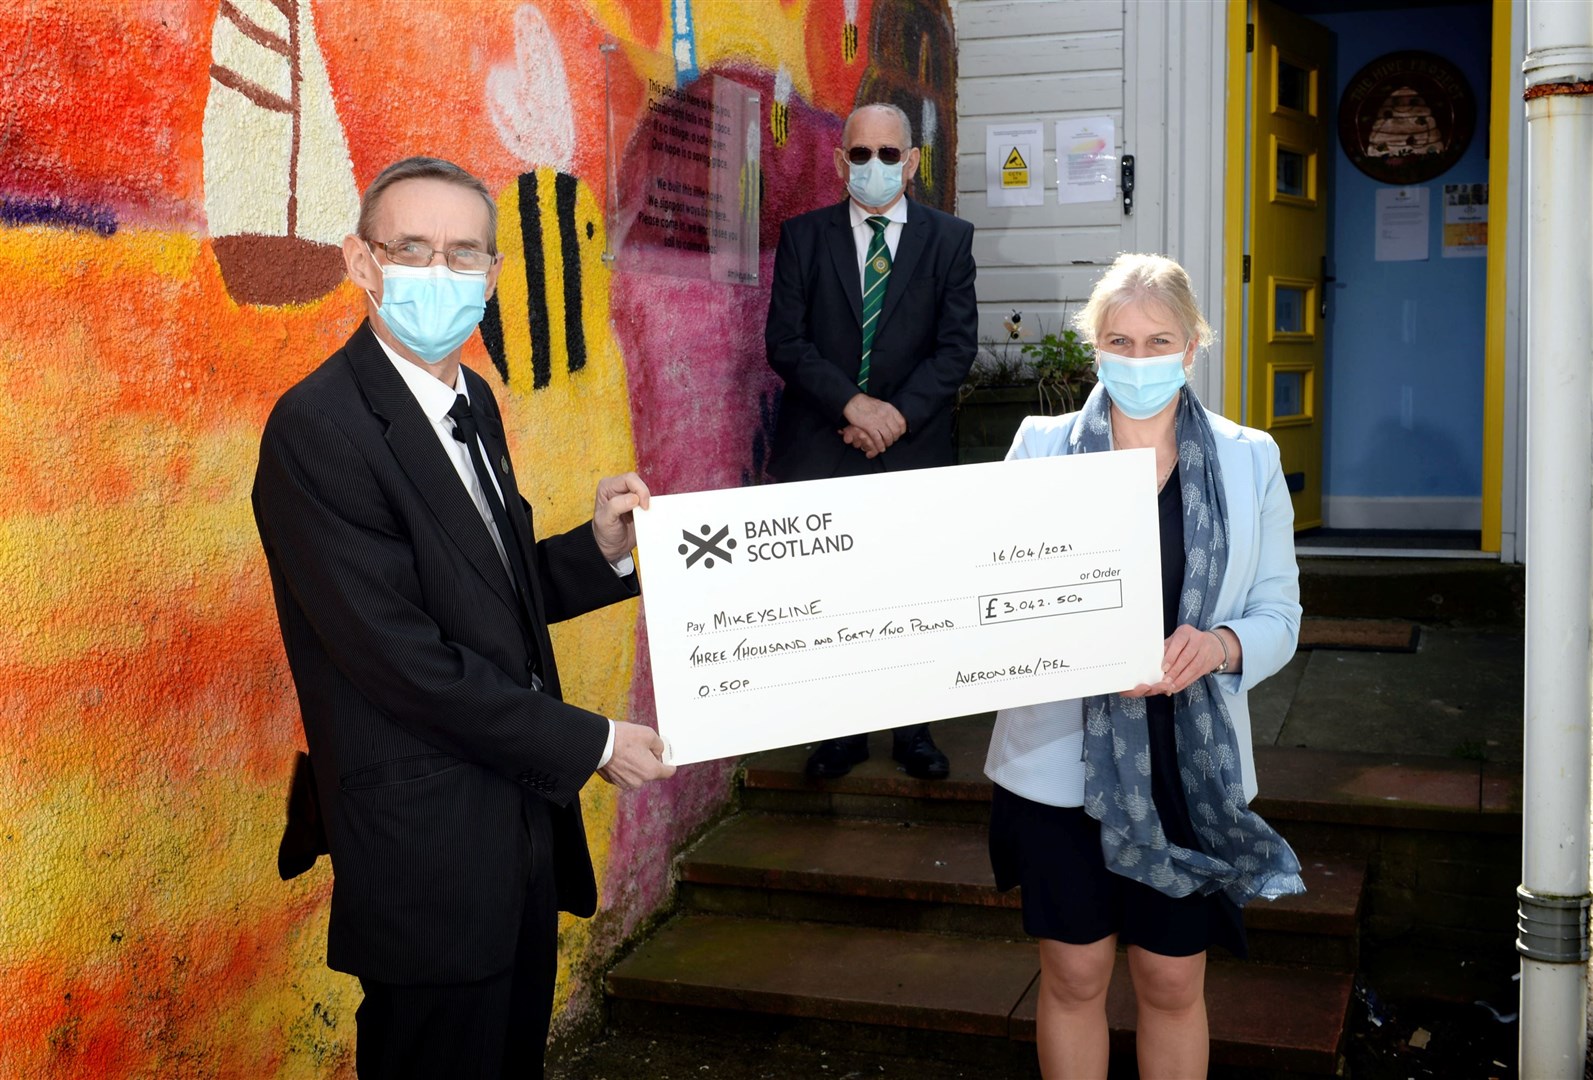 George Robinson raised £3042 from the sale of his tapestry. George Robinson, Lodge Averon and Robin Cattanach, Provincial Grandmaster of Ross & Cromarty, present the cheque to Emily Stokes, service manager of Mikeysline. Picture: James Mackenzie